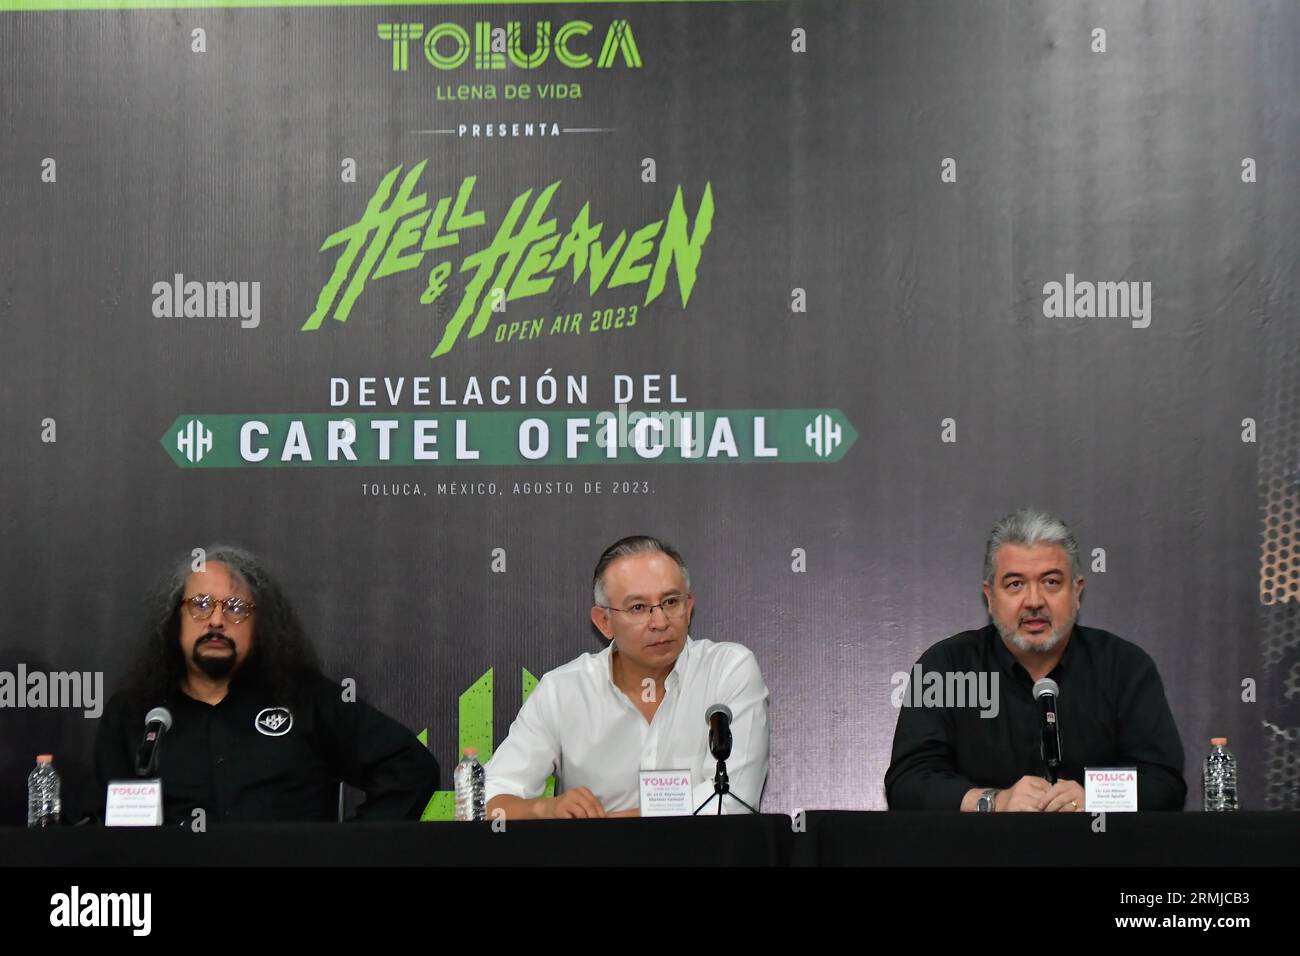 August 24, 2023 Toluca, Mexico : Juan Carlos Guerrero, Official Spokesperson for Hell and Heaven Festival, Raymundo Martinez Carbajal, Mayor of Toluca, Luis Manuel Garcia Aguilar, General Director of Centro Dinamico Pegaso, during a press conference where they officially presented the poster for the Hell and Heaven Open Air 2023 music festival, which will take place at the Pegaso Dynamic Center in the city of Toluca from November 3 to 5, 2023. on August 24, 2023 in Toluca, Mexico. (Photo by Arturo Hernandez/Eyepix Group) (Photo by Eyepix/NurPhoto) Stock Photo